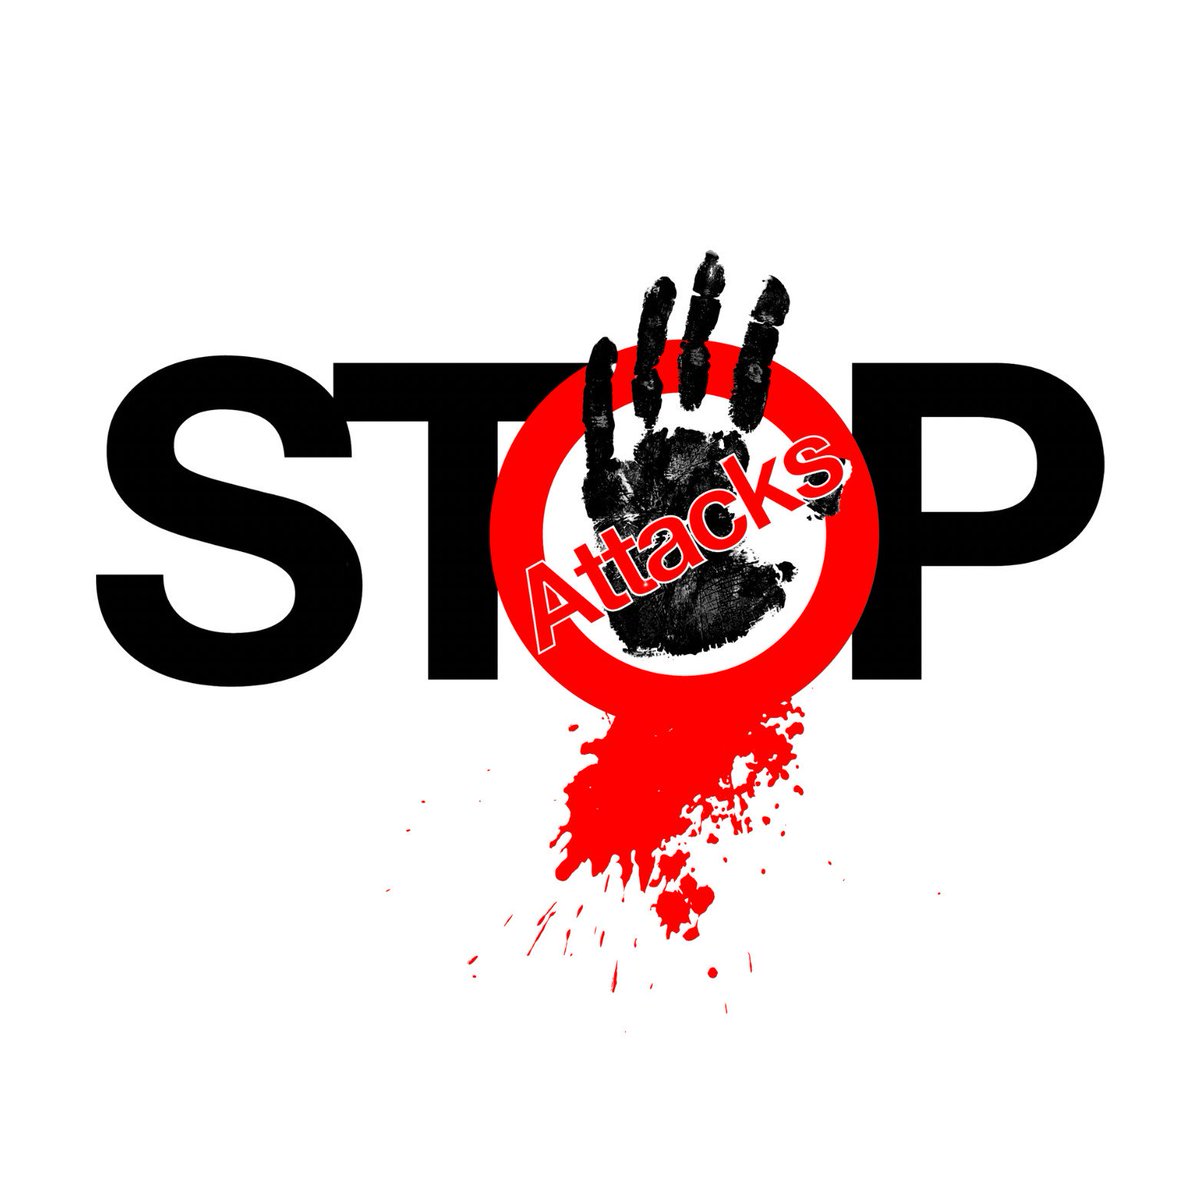 Tonight, another young man has suffered brutal gunshot injuries in West Belfast. Injuries & trauma that will live with him forever. In whose name & for what aim? This is not our peace. This is abuse. Those who carried this out are abusers and criminals, nothing more. #StopAttacks